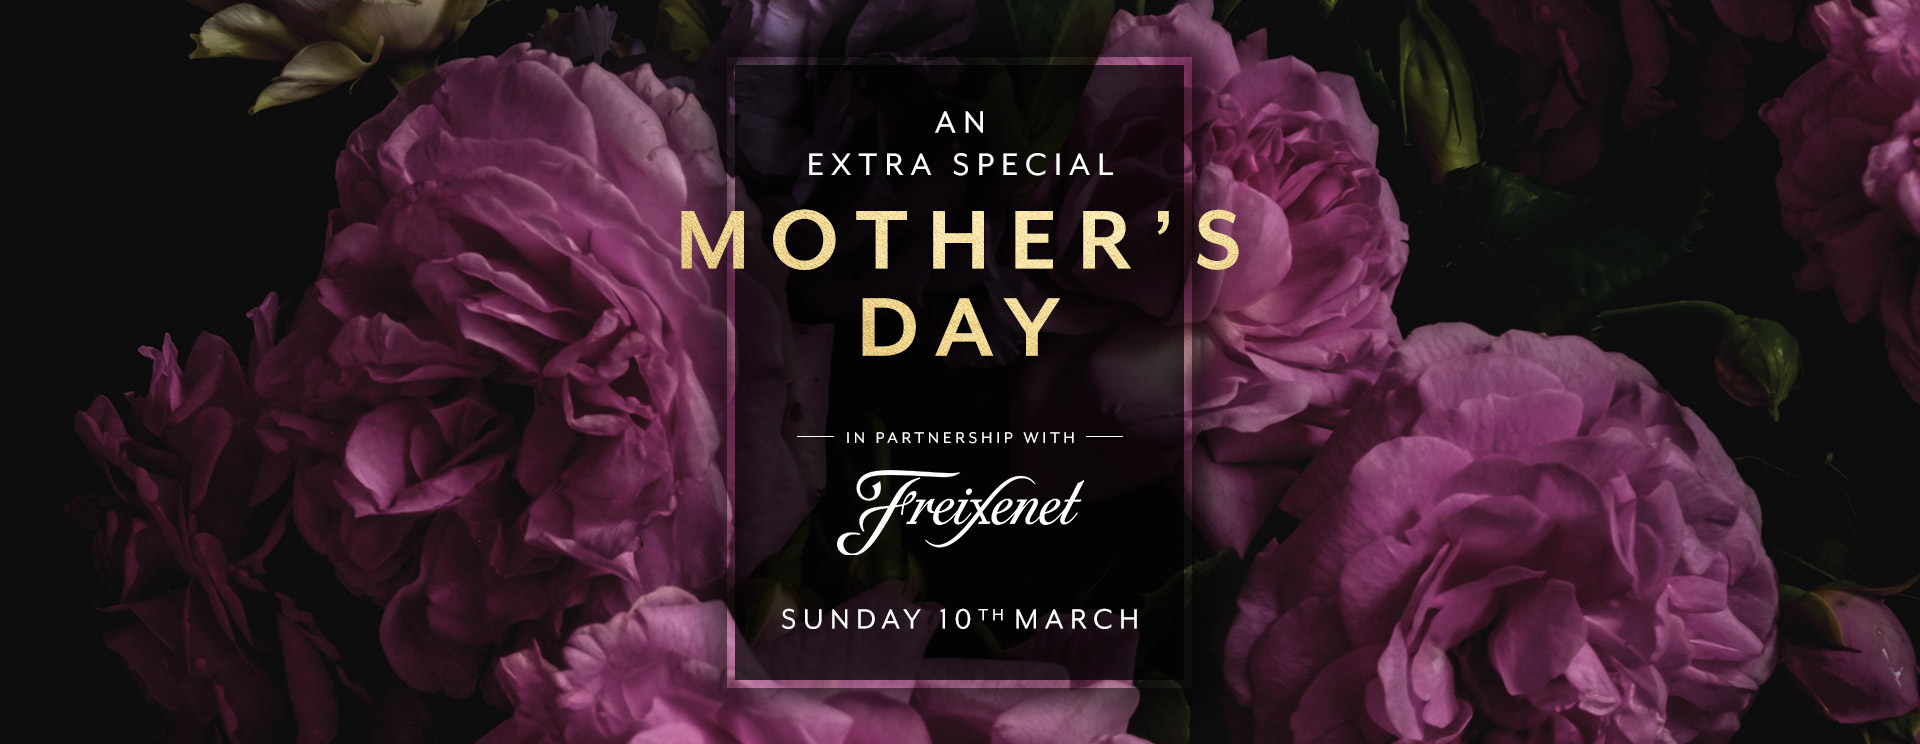 Mother’s Day menu/meal in Southampton